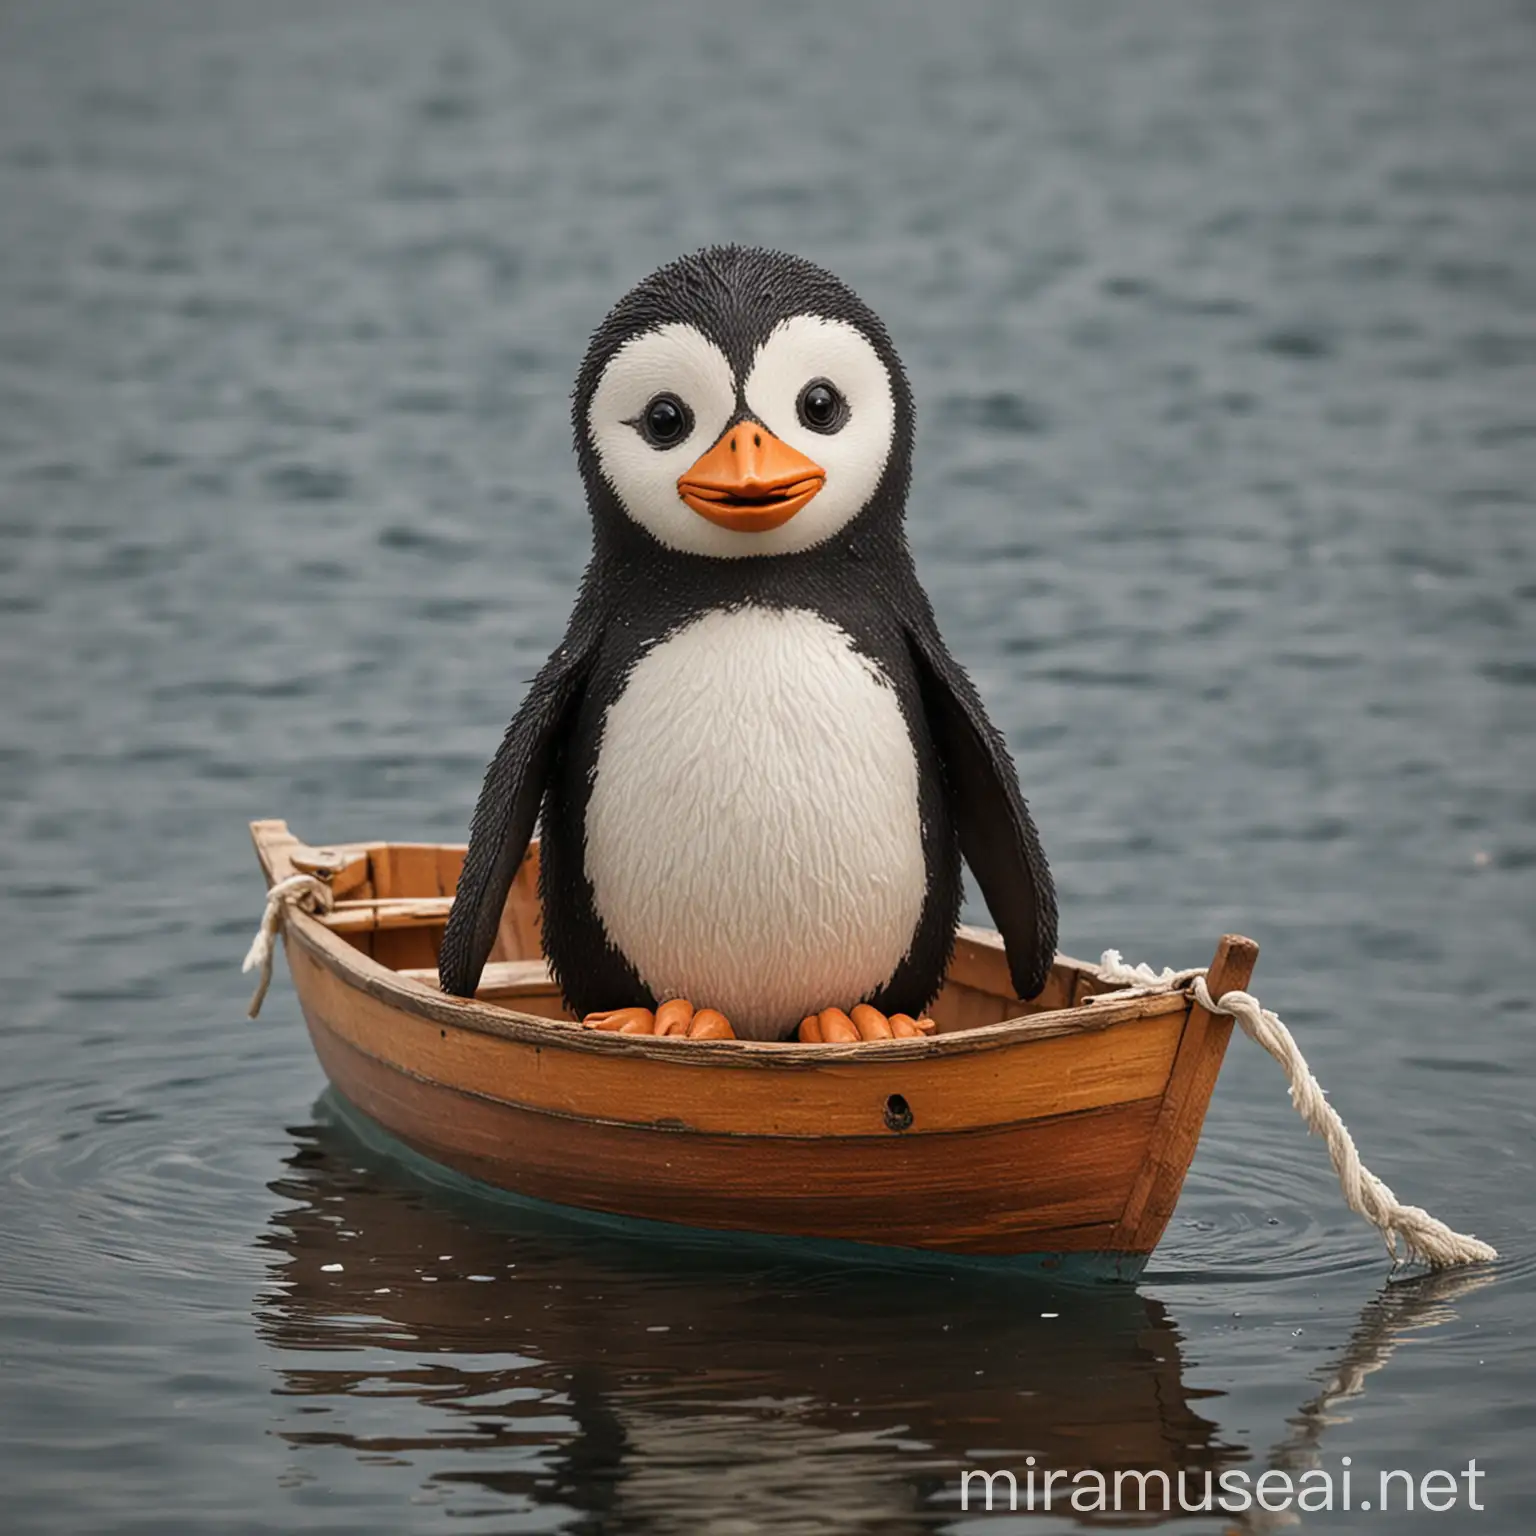 Penguin Sailing in a Boat Amid Icy Waters